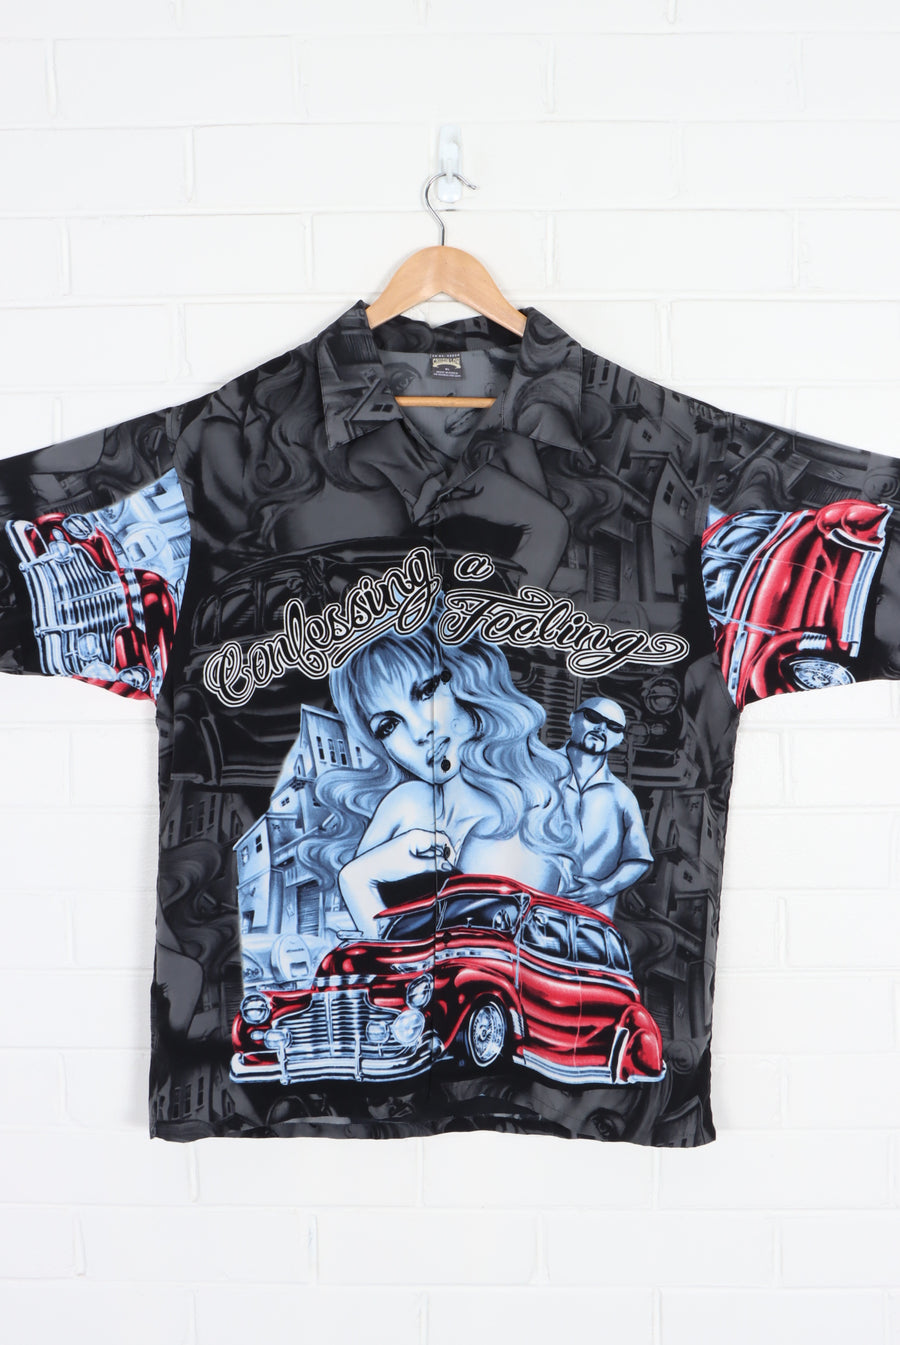 CRUIZIN LOW "Confessing A Feeling" All Over Short Sleeve Shirt (XL)